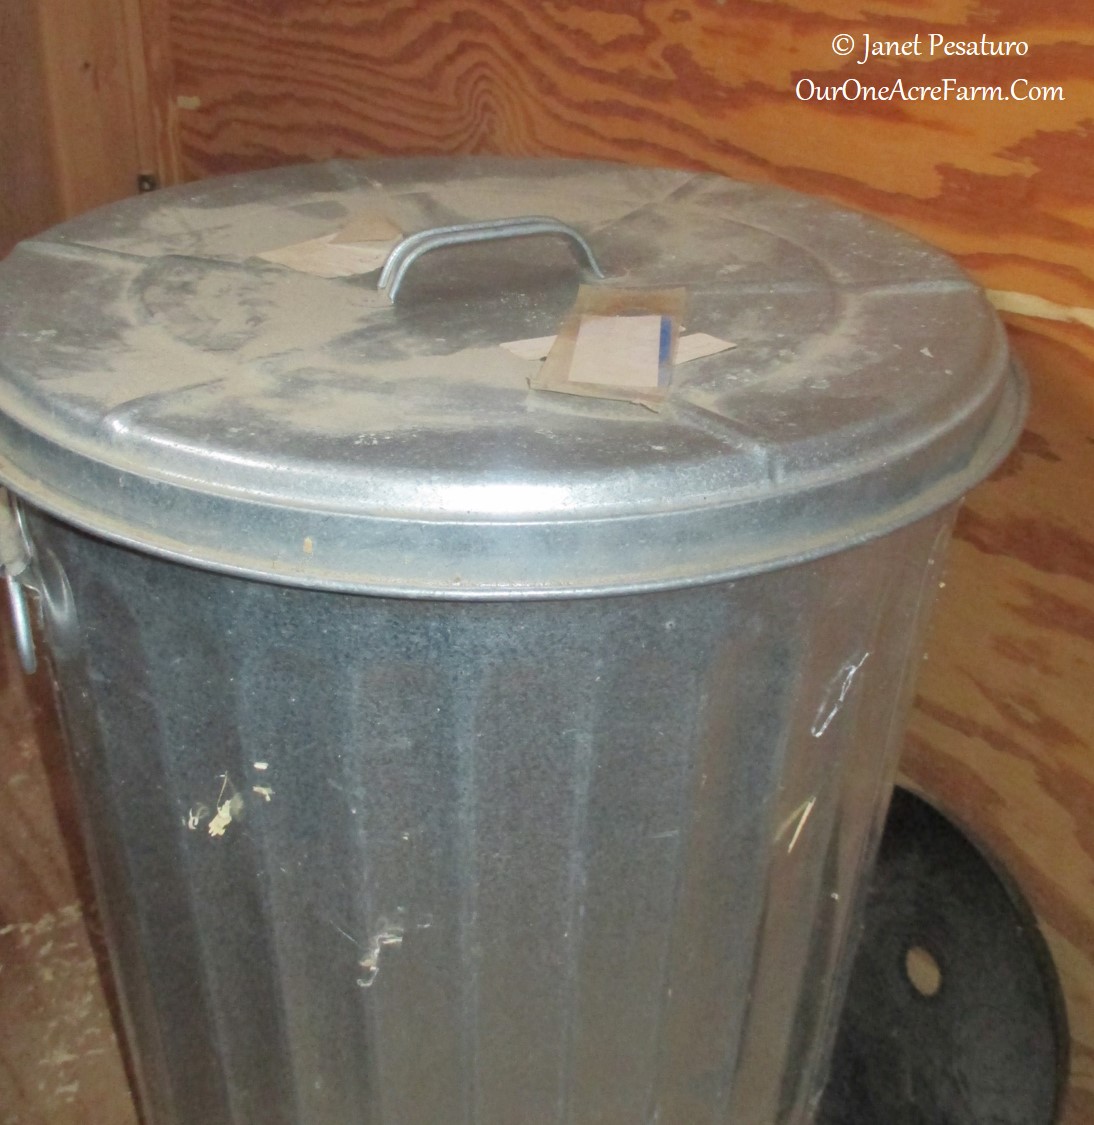 Keep feed in covered metal barrels to keep out mice and rats.